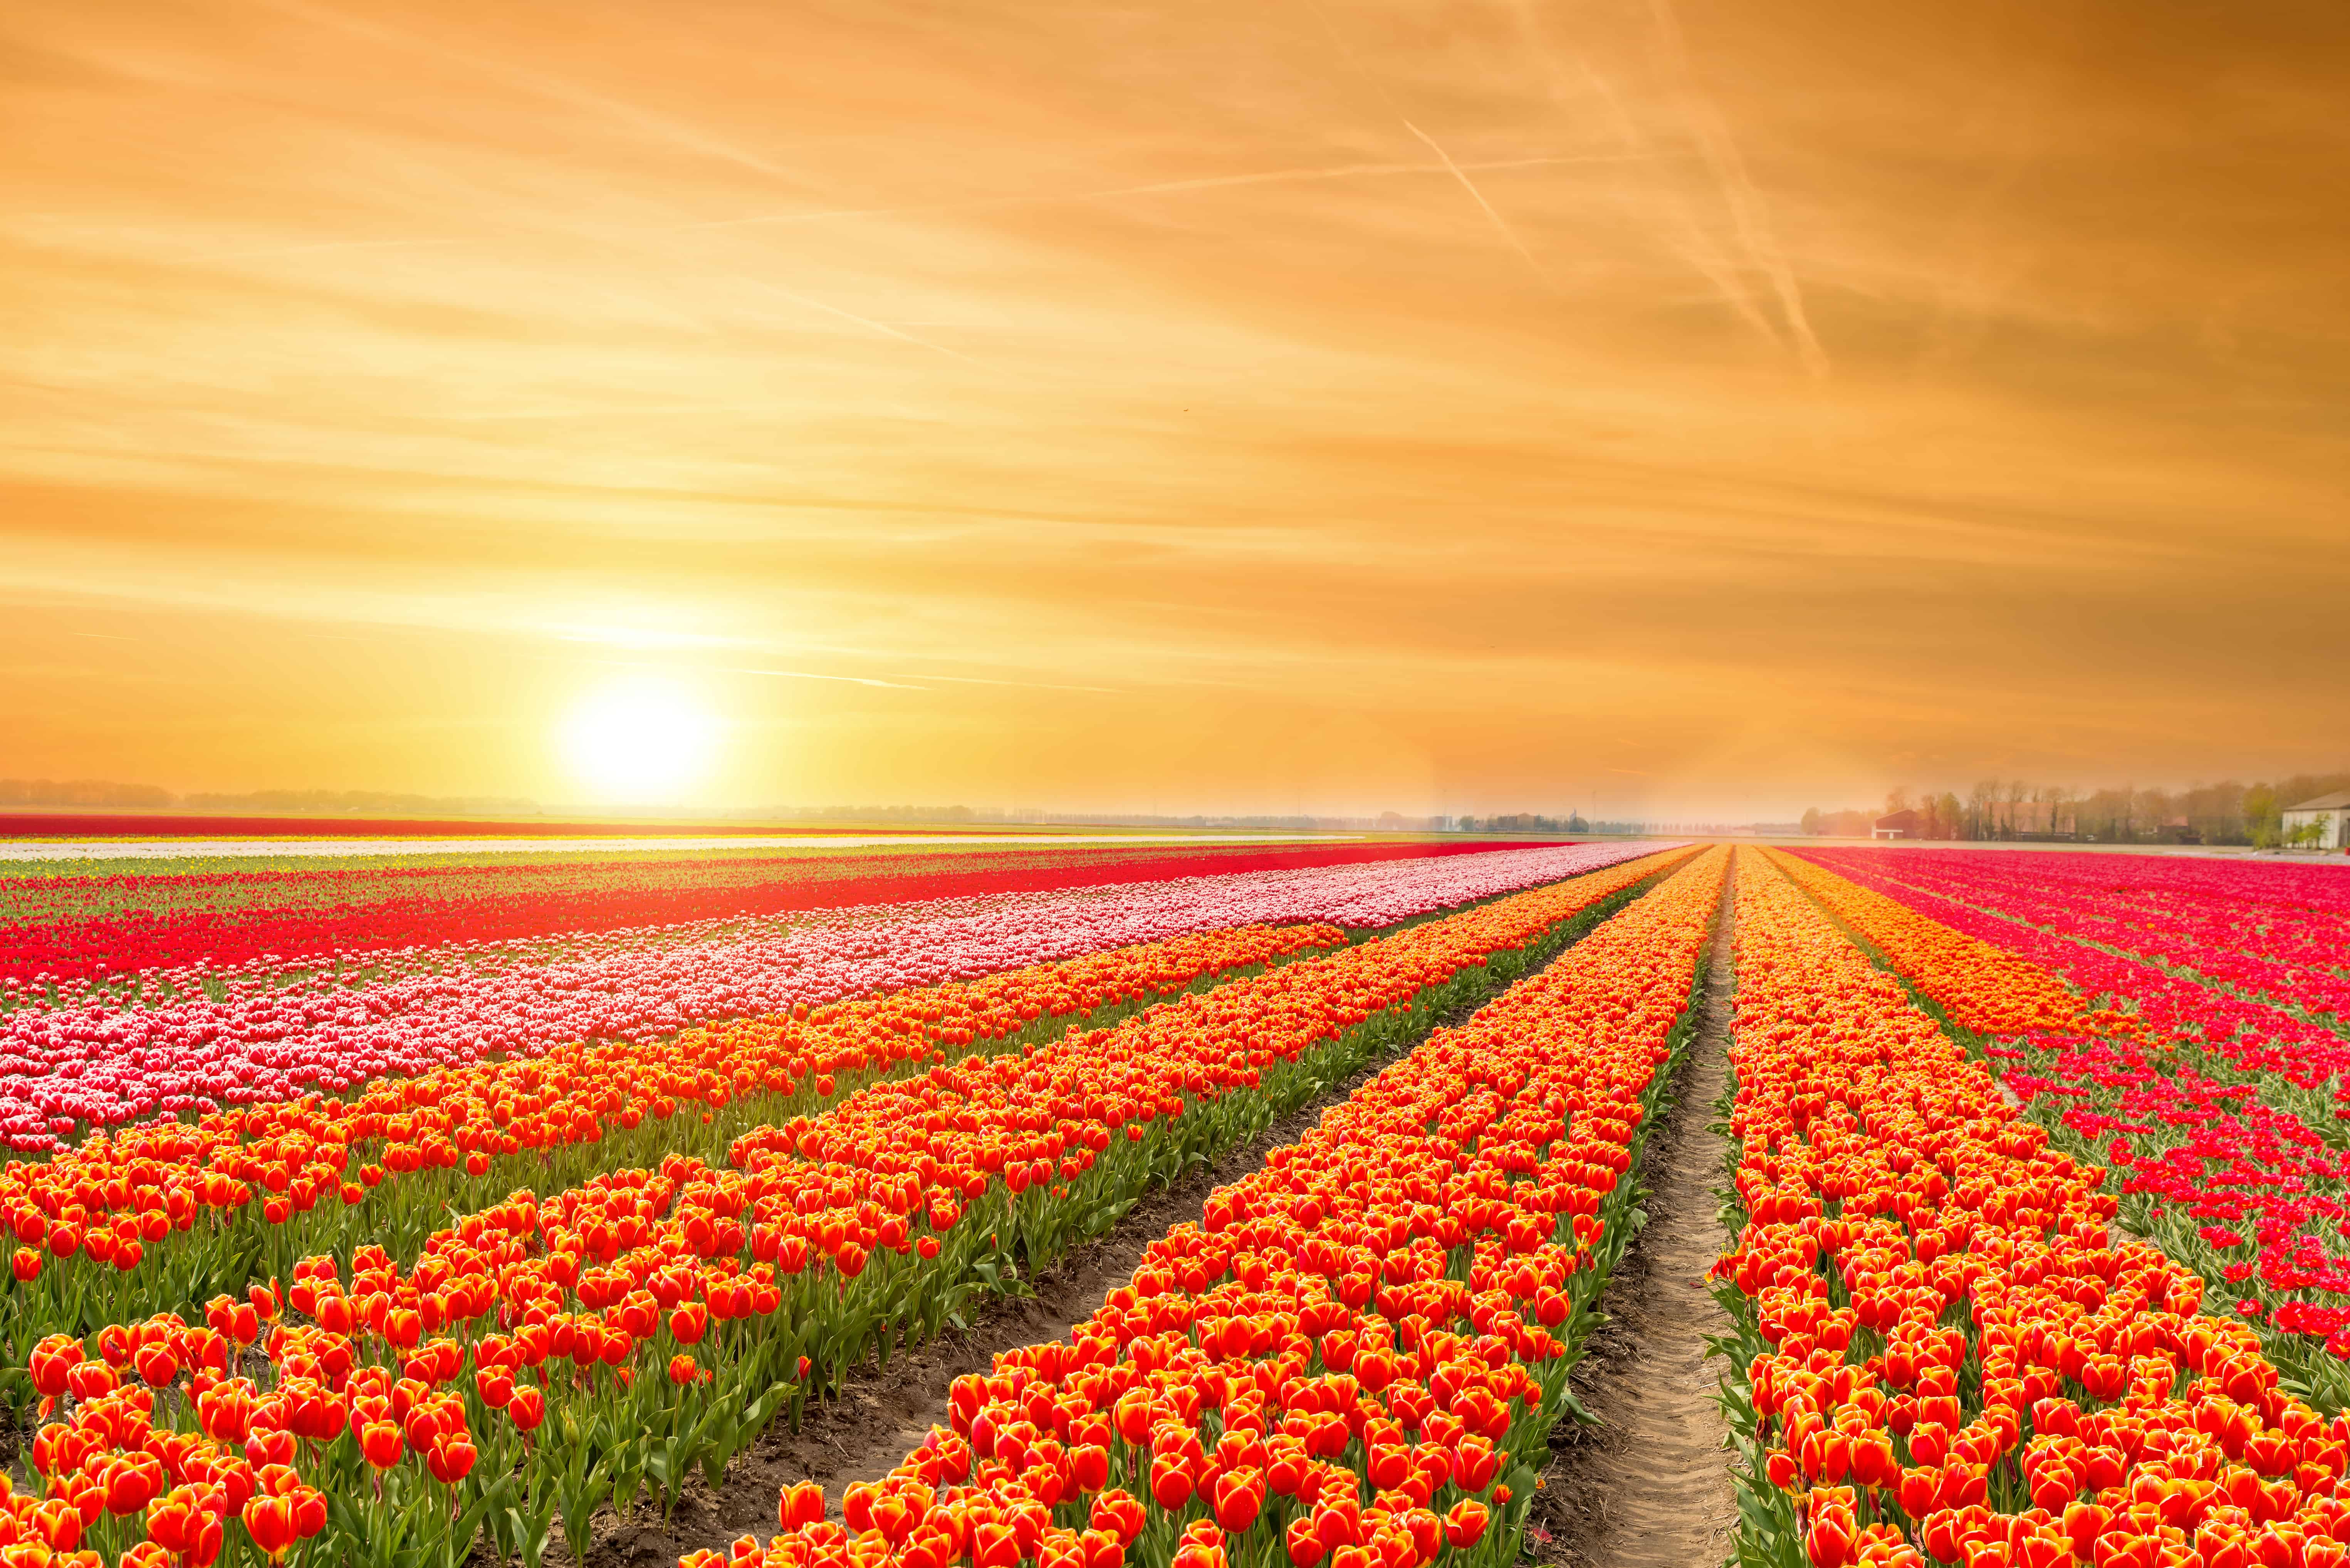 The Netherlands grows billions of tulips each year.